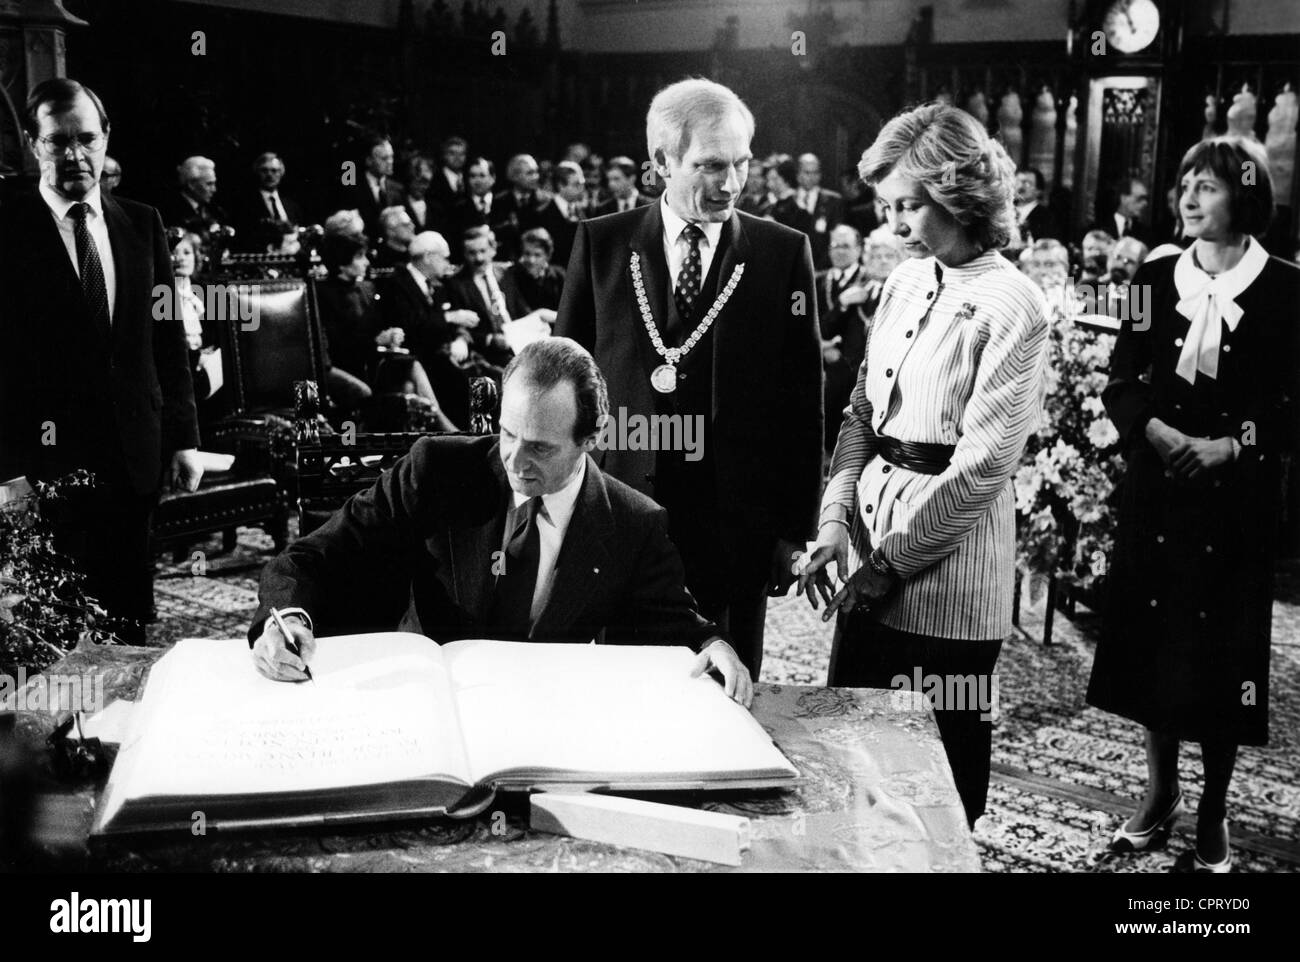 Juan Carlos I, * 5.1.1938, King of Spain since 22.11.1975, state visit to Germany, with wife Queen Sophia and Lord Mayor Georg Kronawitter, signing the Golden Book, Munich Town Hall, 27.2.1986, Stock Photo